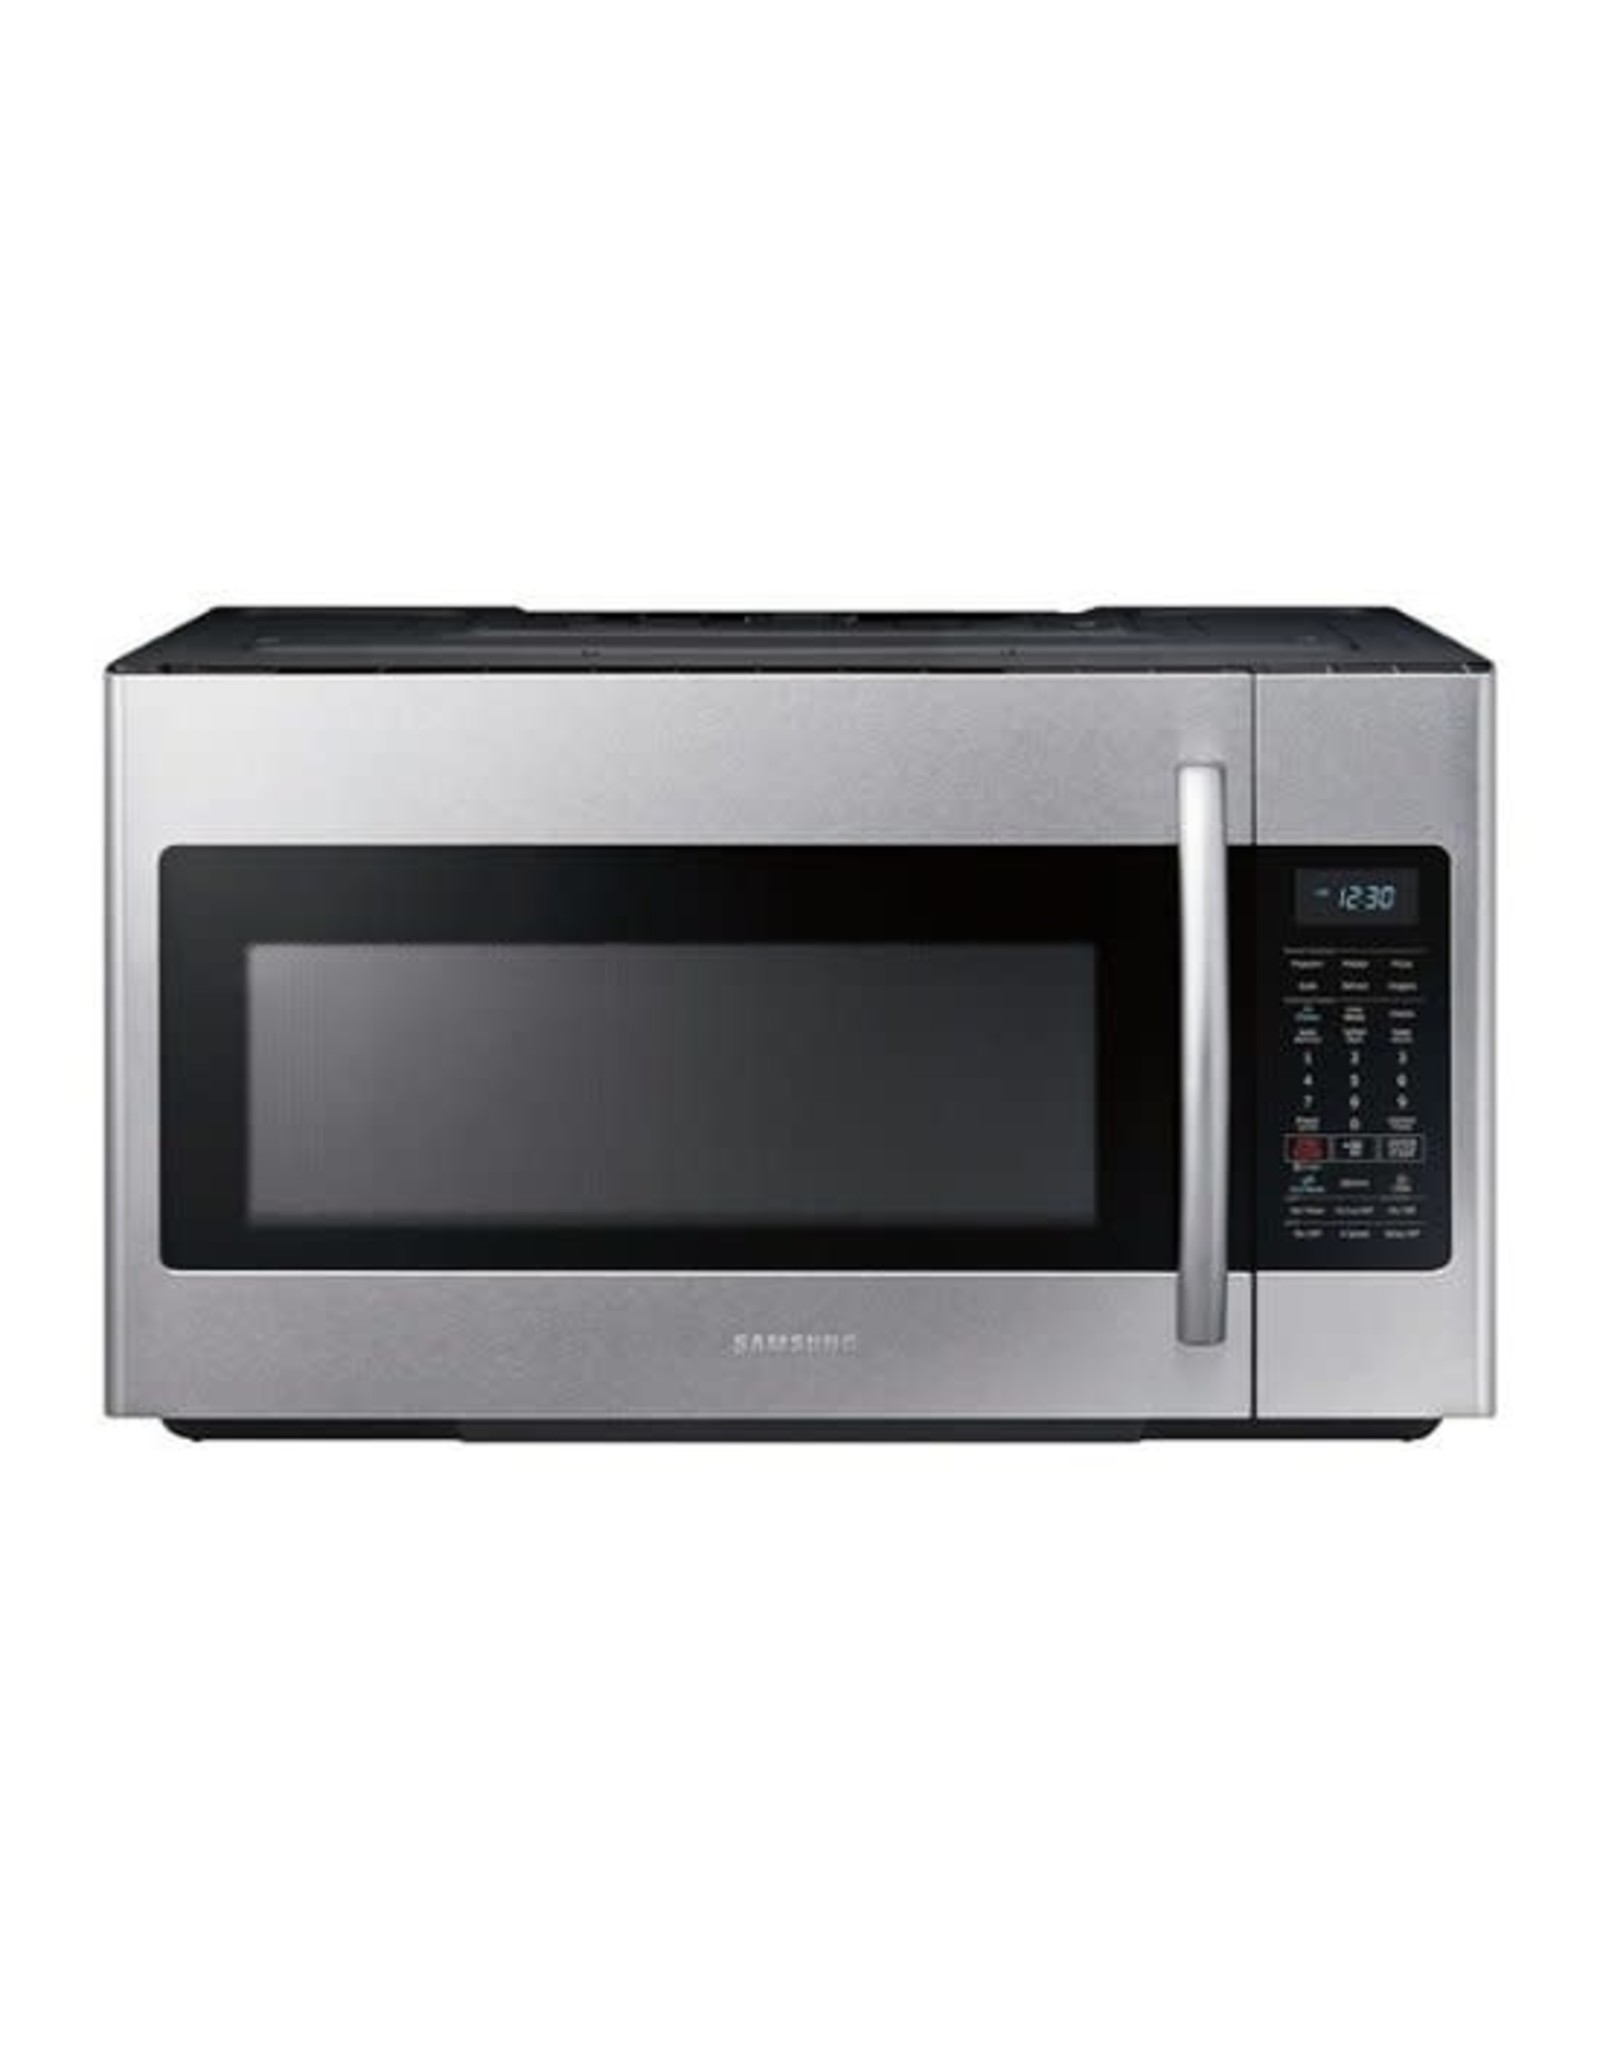 SAMSUNG ME18H704SFS Samsung - 1.8 cu. ft. Over-the-Range Fingerprint Resistant Microwave with Sensor Cooking - Stainless steel